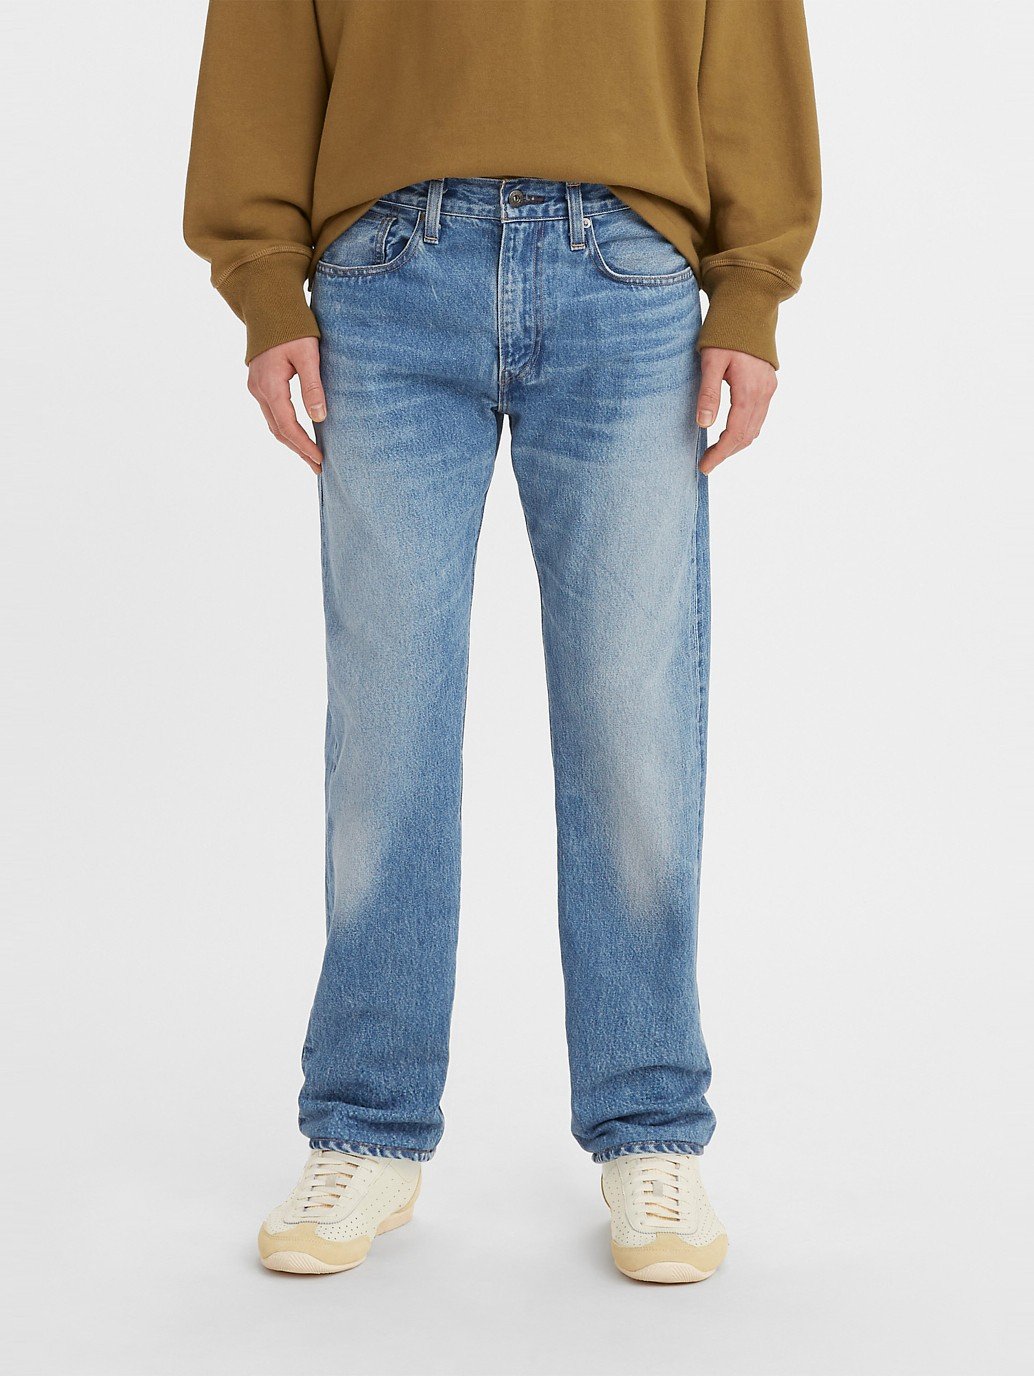 Introducir 61+ imagen levi’s straight tapered jeans